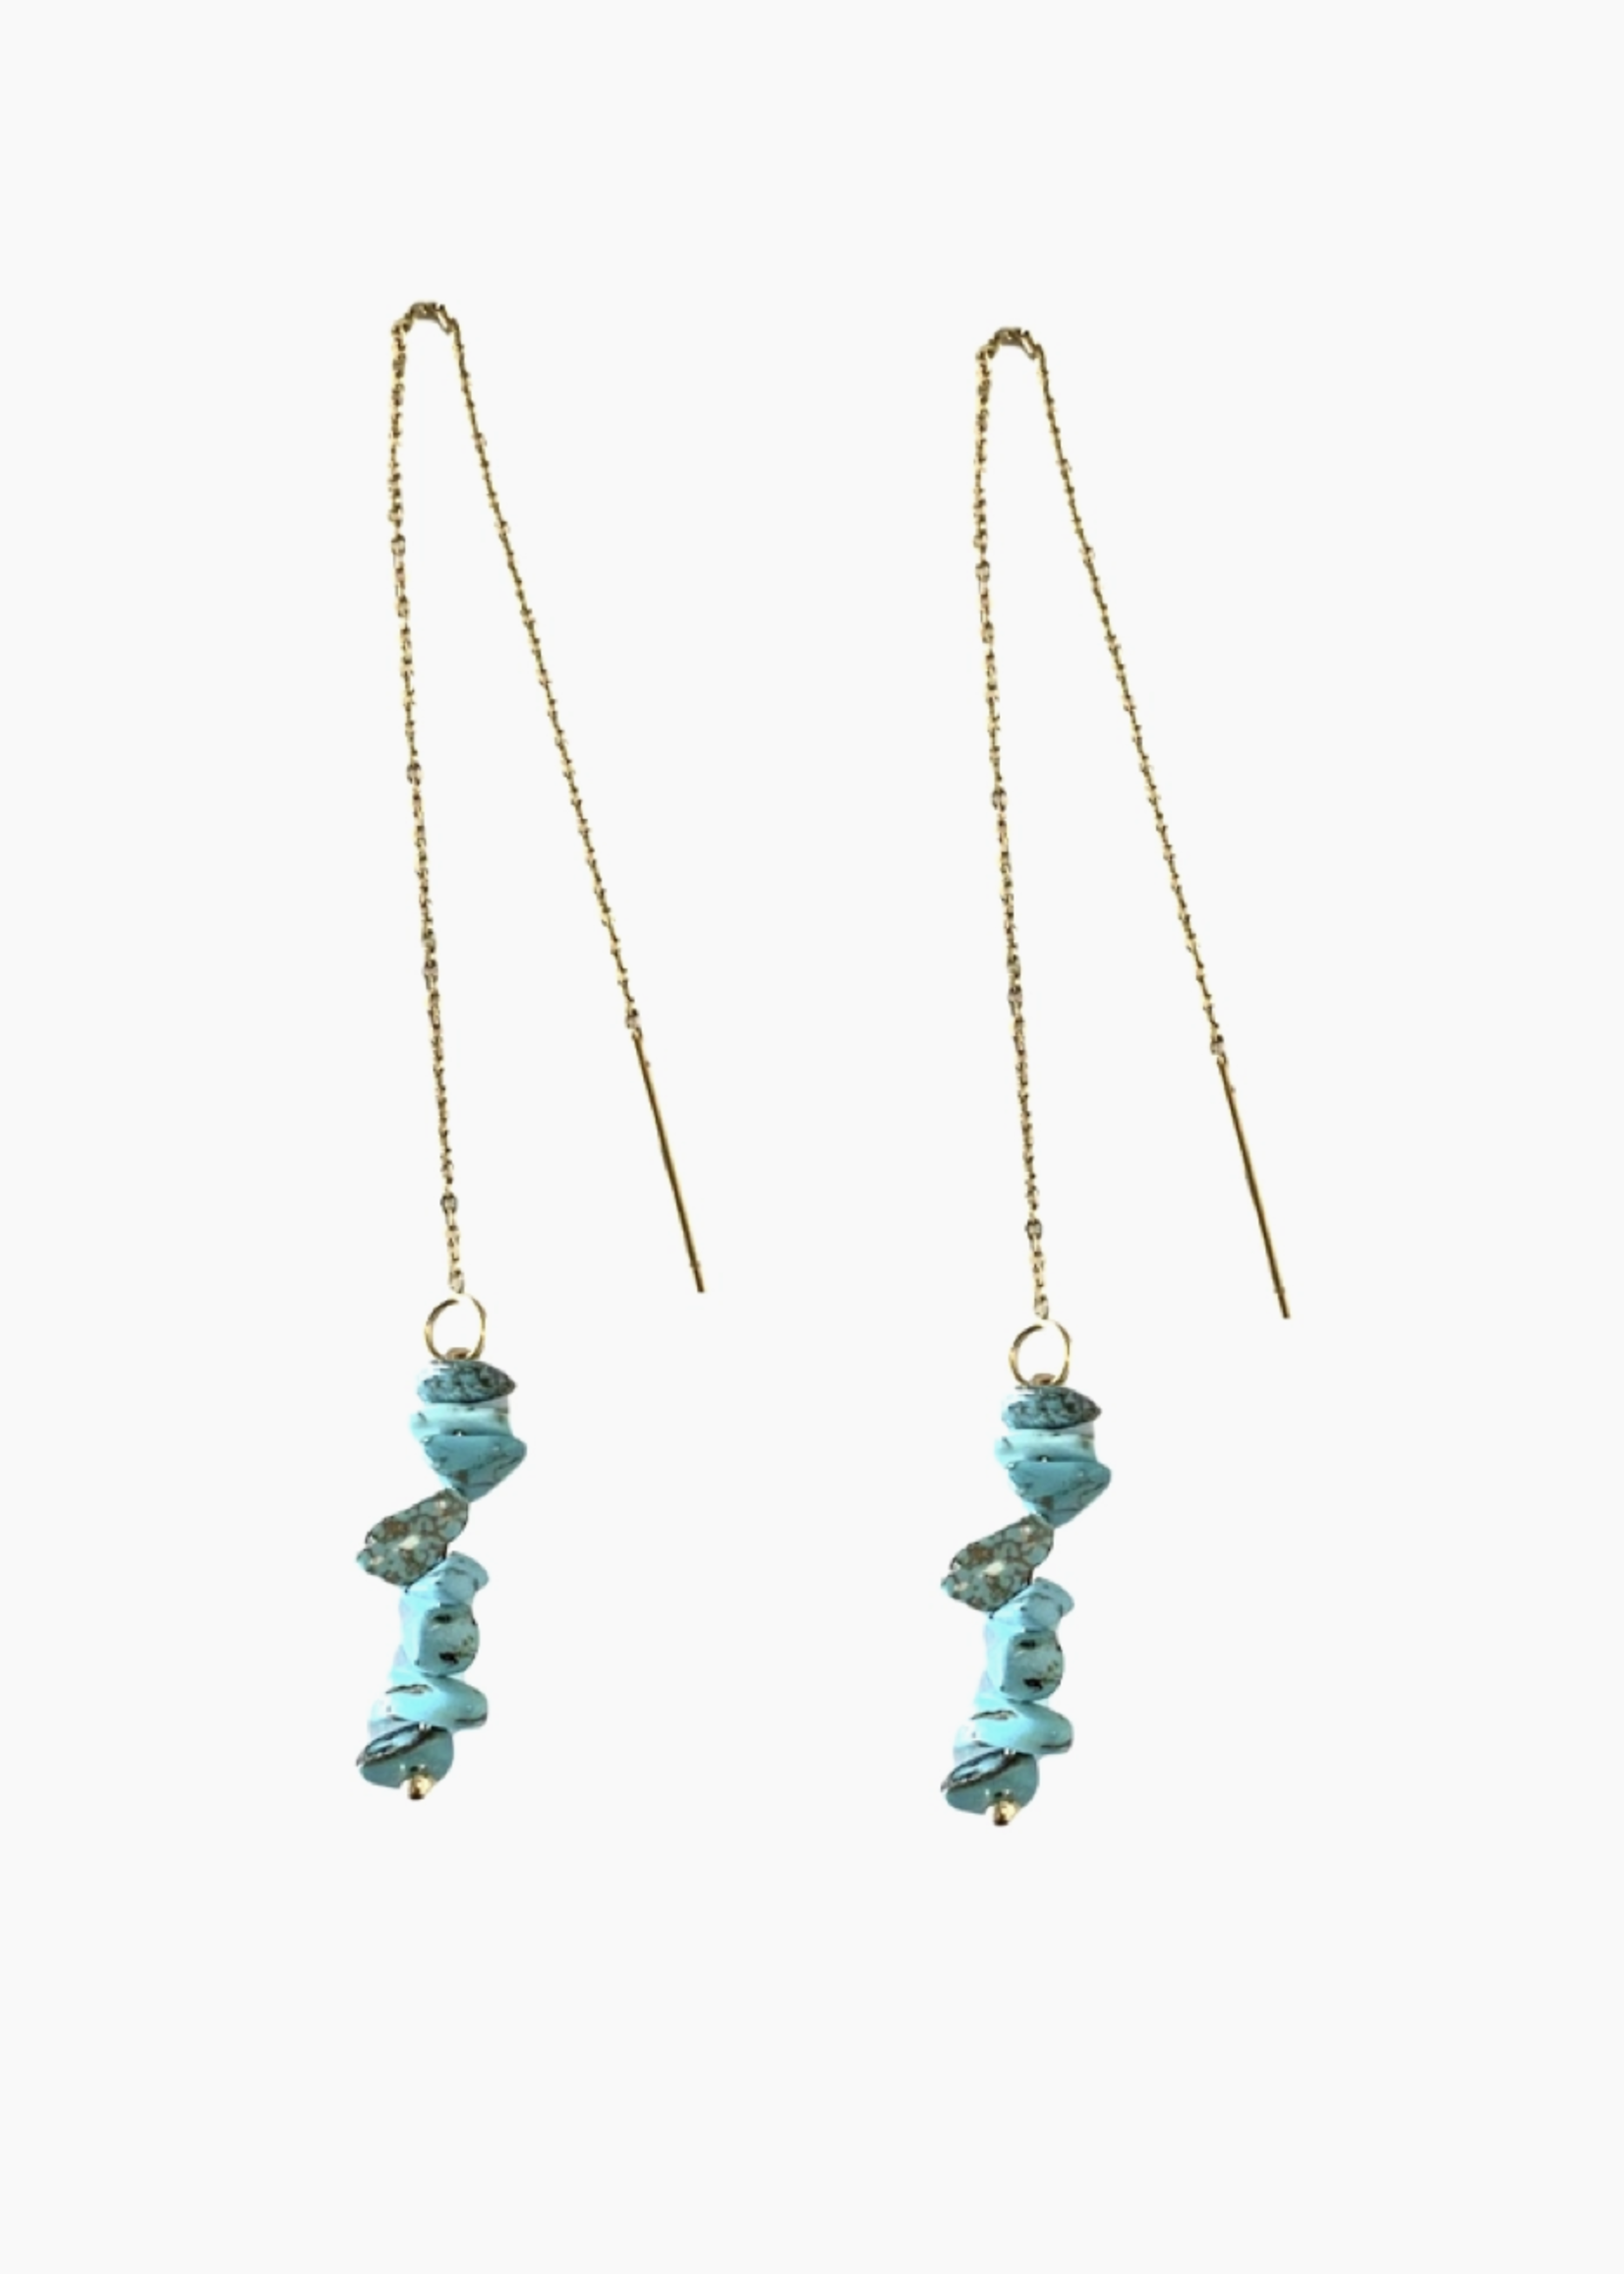 ST. ARMANDS OF DESIGNS OF SARASOTA TURQUOISE STACKED STATEMENT THREADER EARRINGS